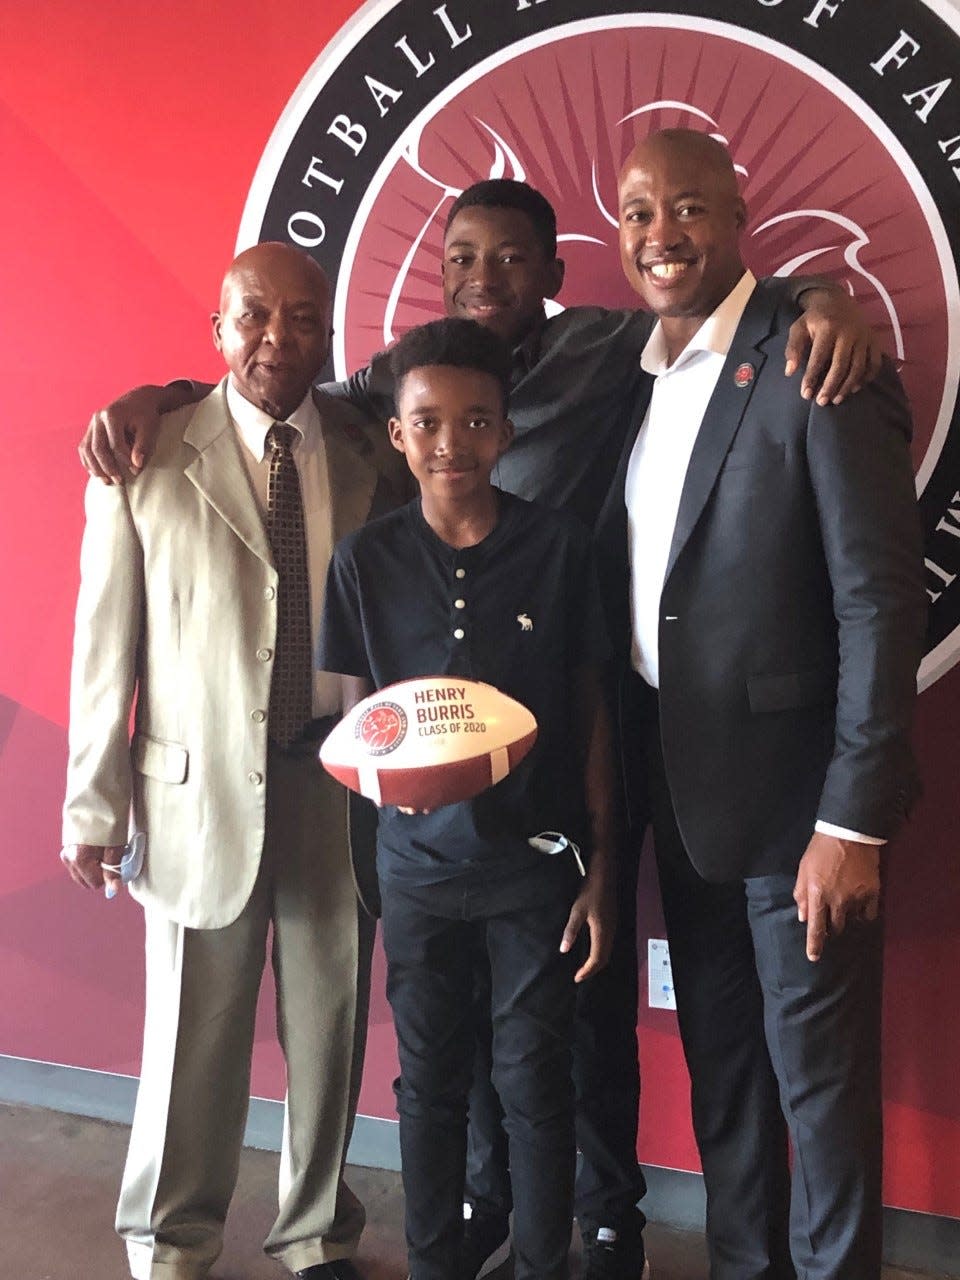 Canadian Football Hall of Famer Henry Burris shown with his father Henry Sr. and his sons Armand and Barron.